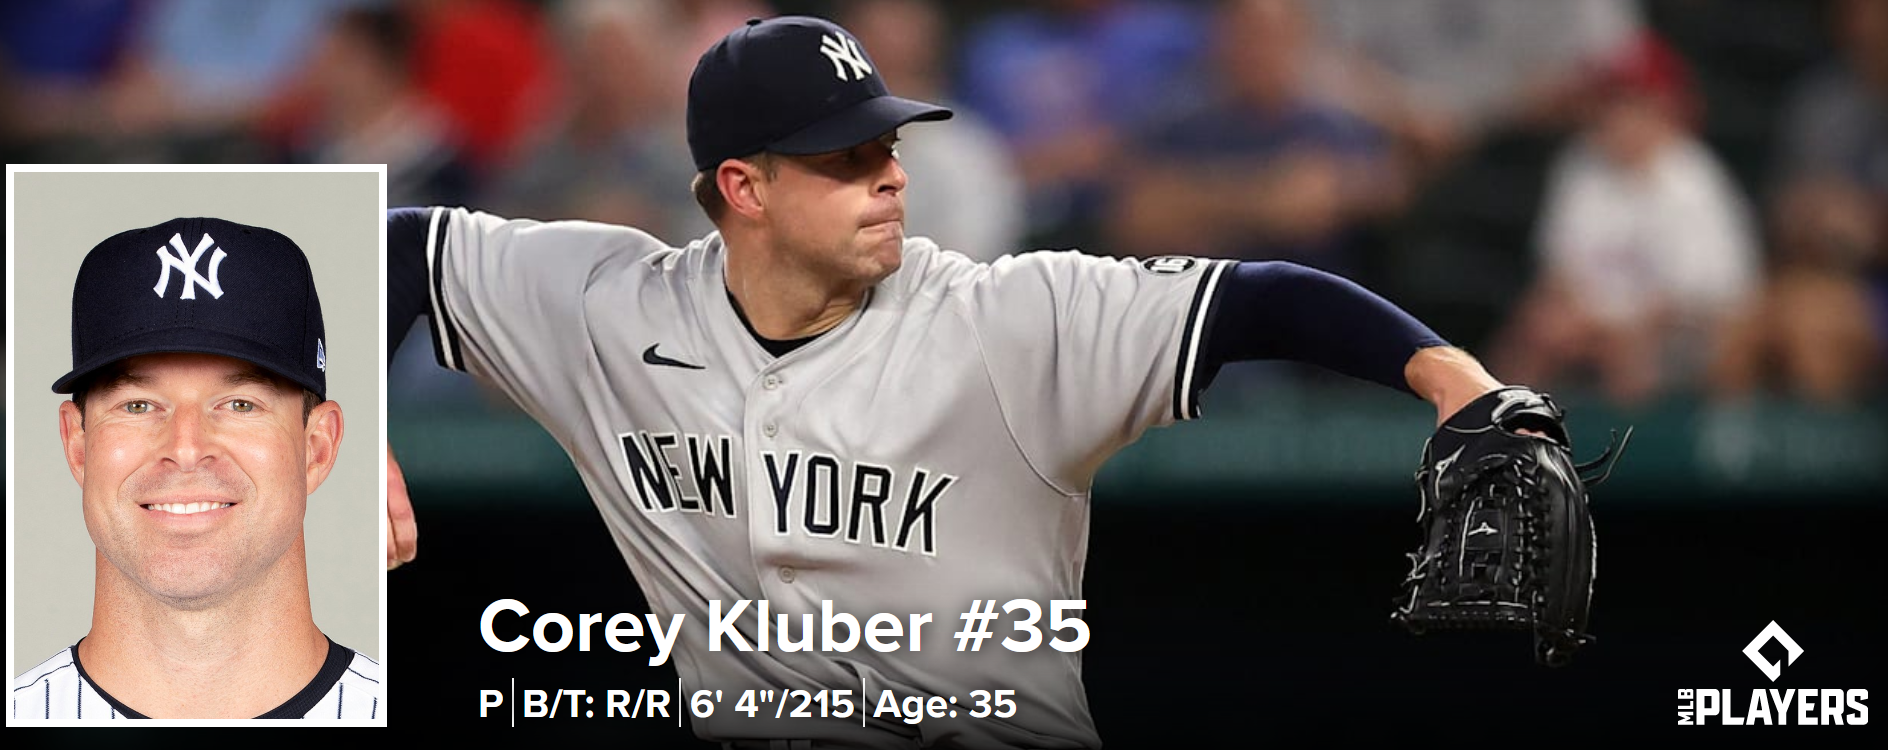 How Corey Kluber signing was keyed by Yankees' performance coach, pro scout  